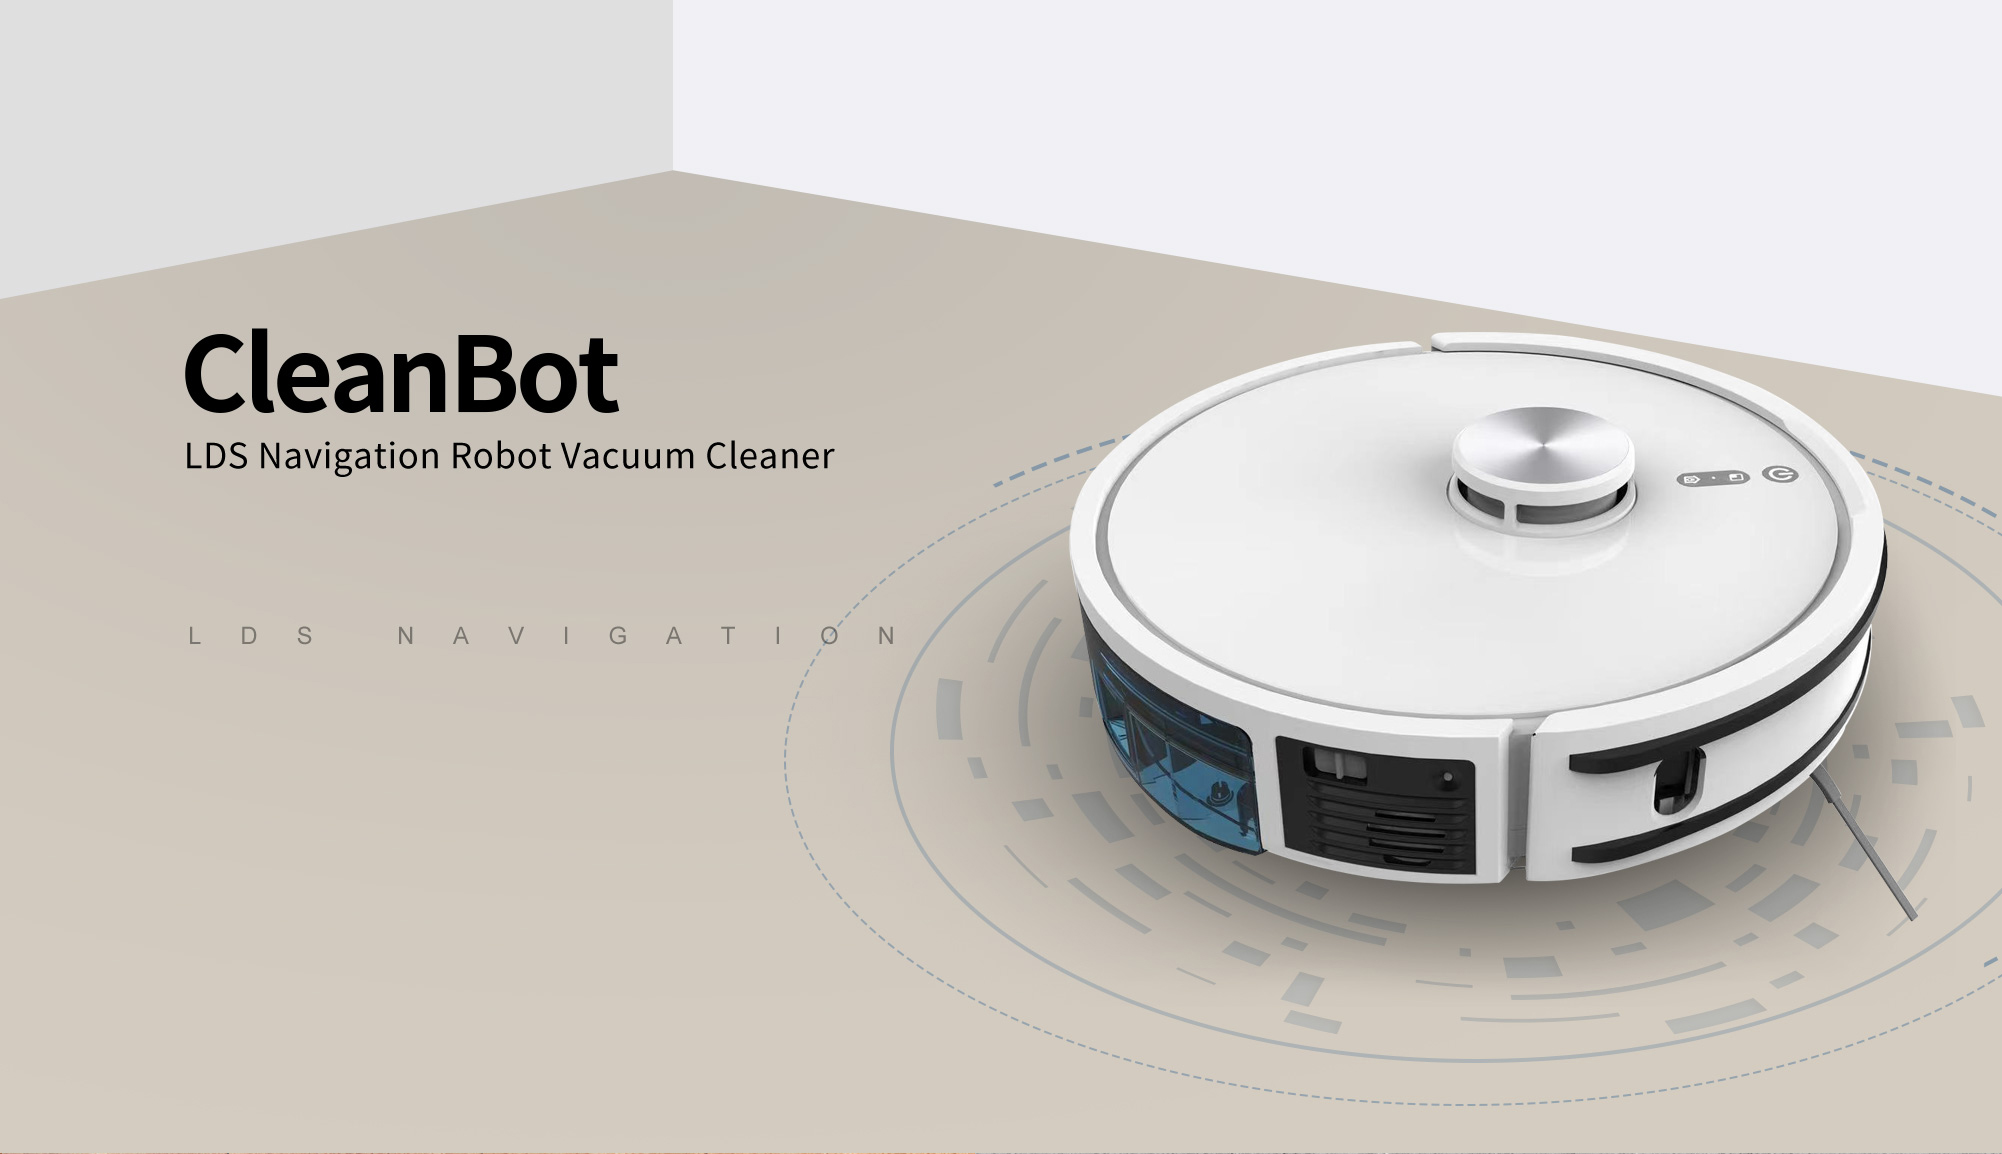 Smart-Home-Appliances-Robot-Vacuum-and-Mop-Combo-Seedream-SM10191-WiFi-App-Robotic-Vacuum-Cleaner-with-Schedule-2-in-1-Mopping-Robot-Vacuum-with-Watertank-and-Dustbin-33